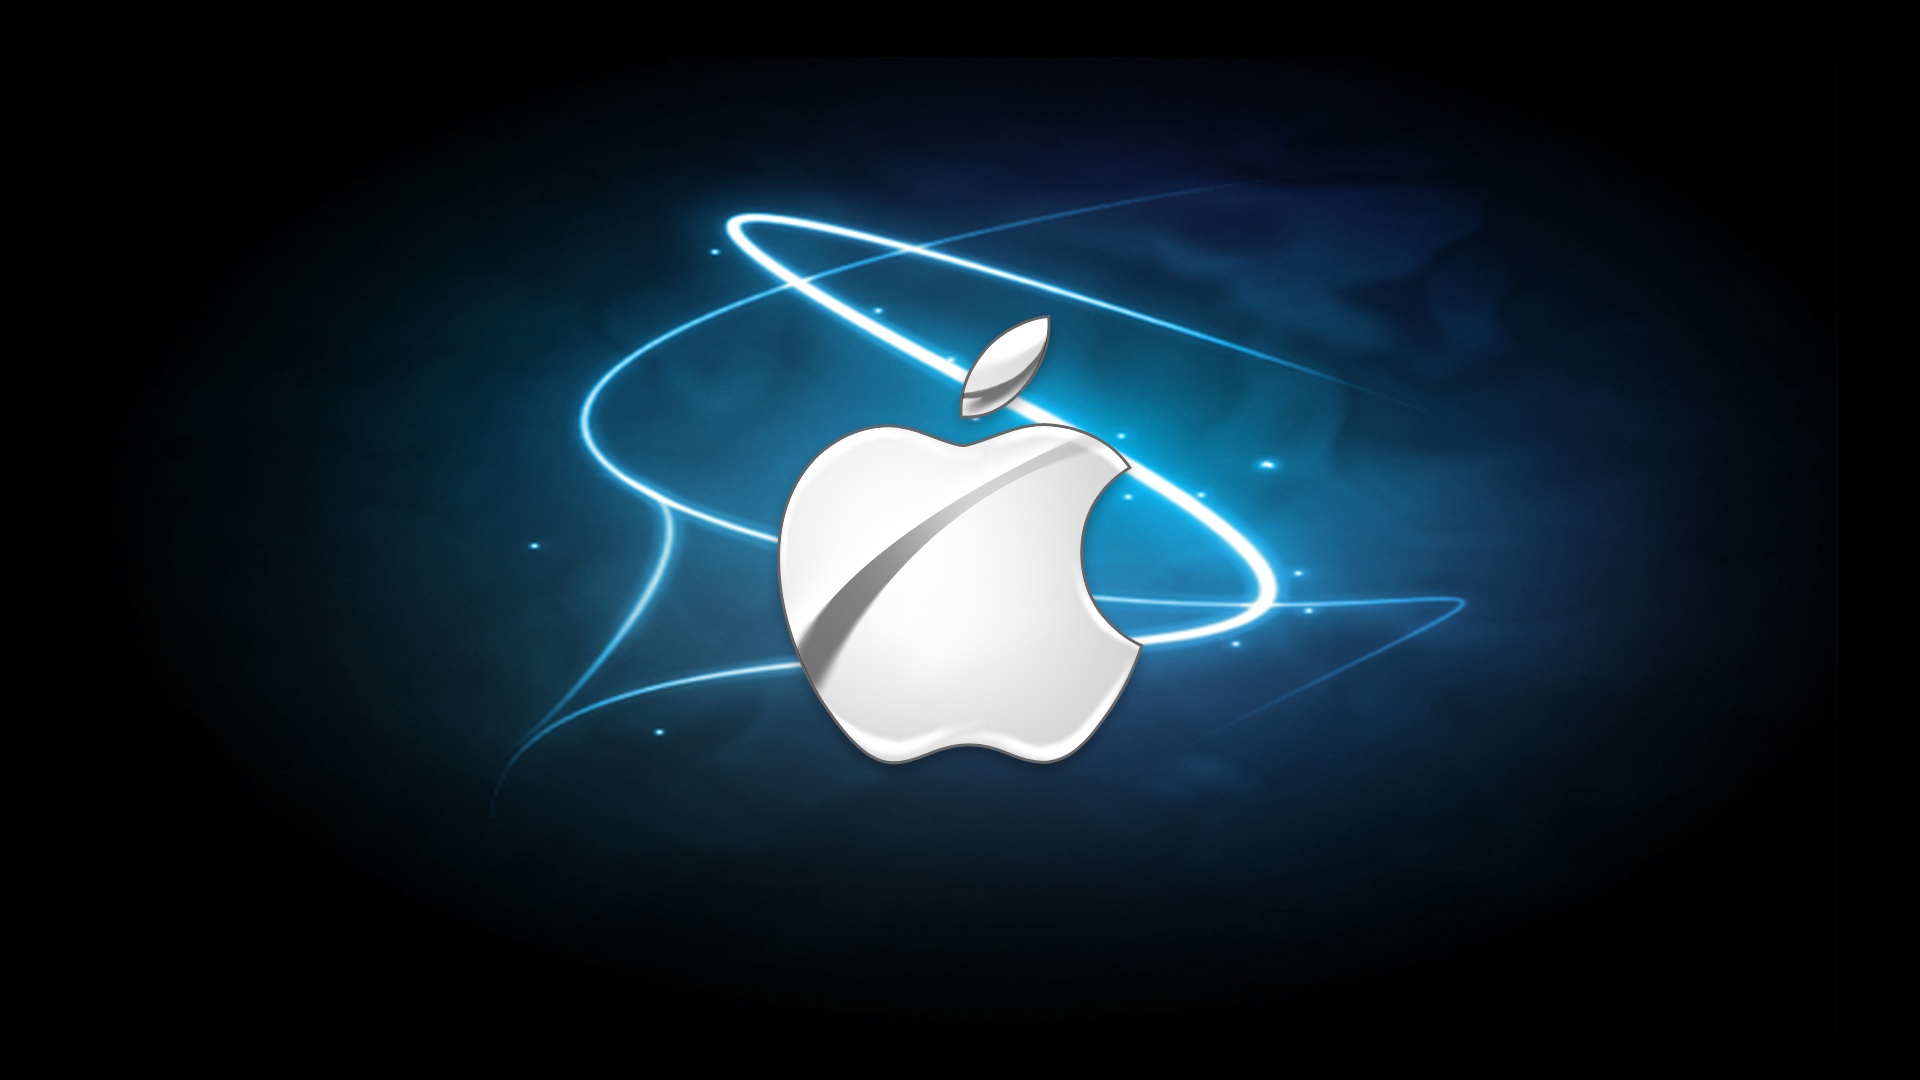 hd apple logo hd wallpaper share this awesome hd background on